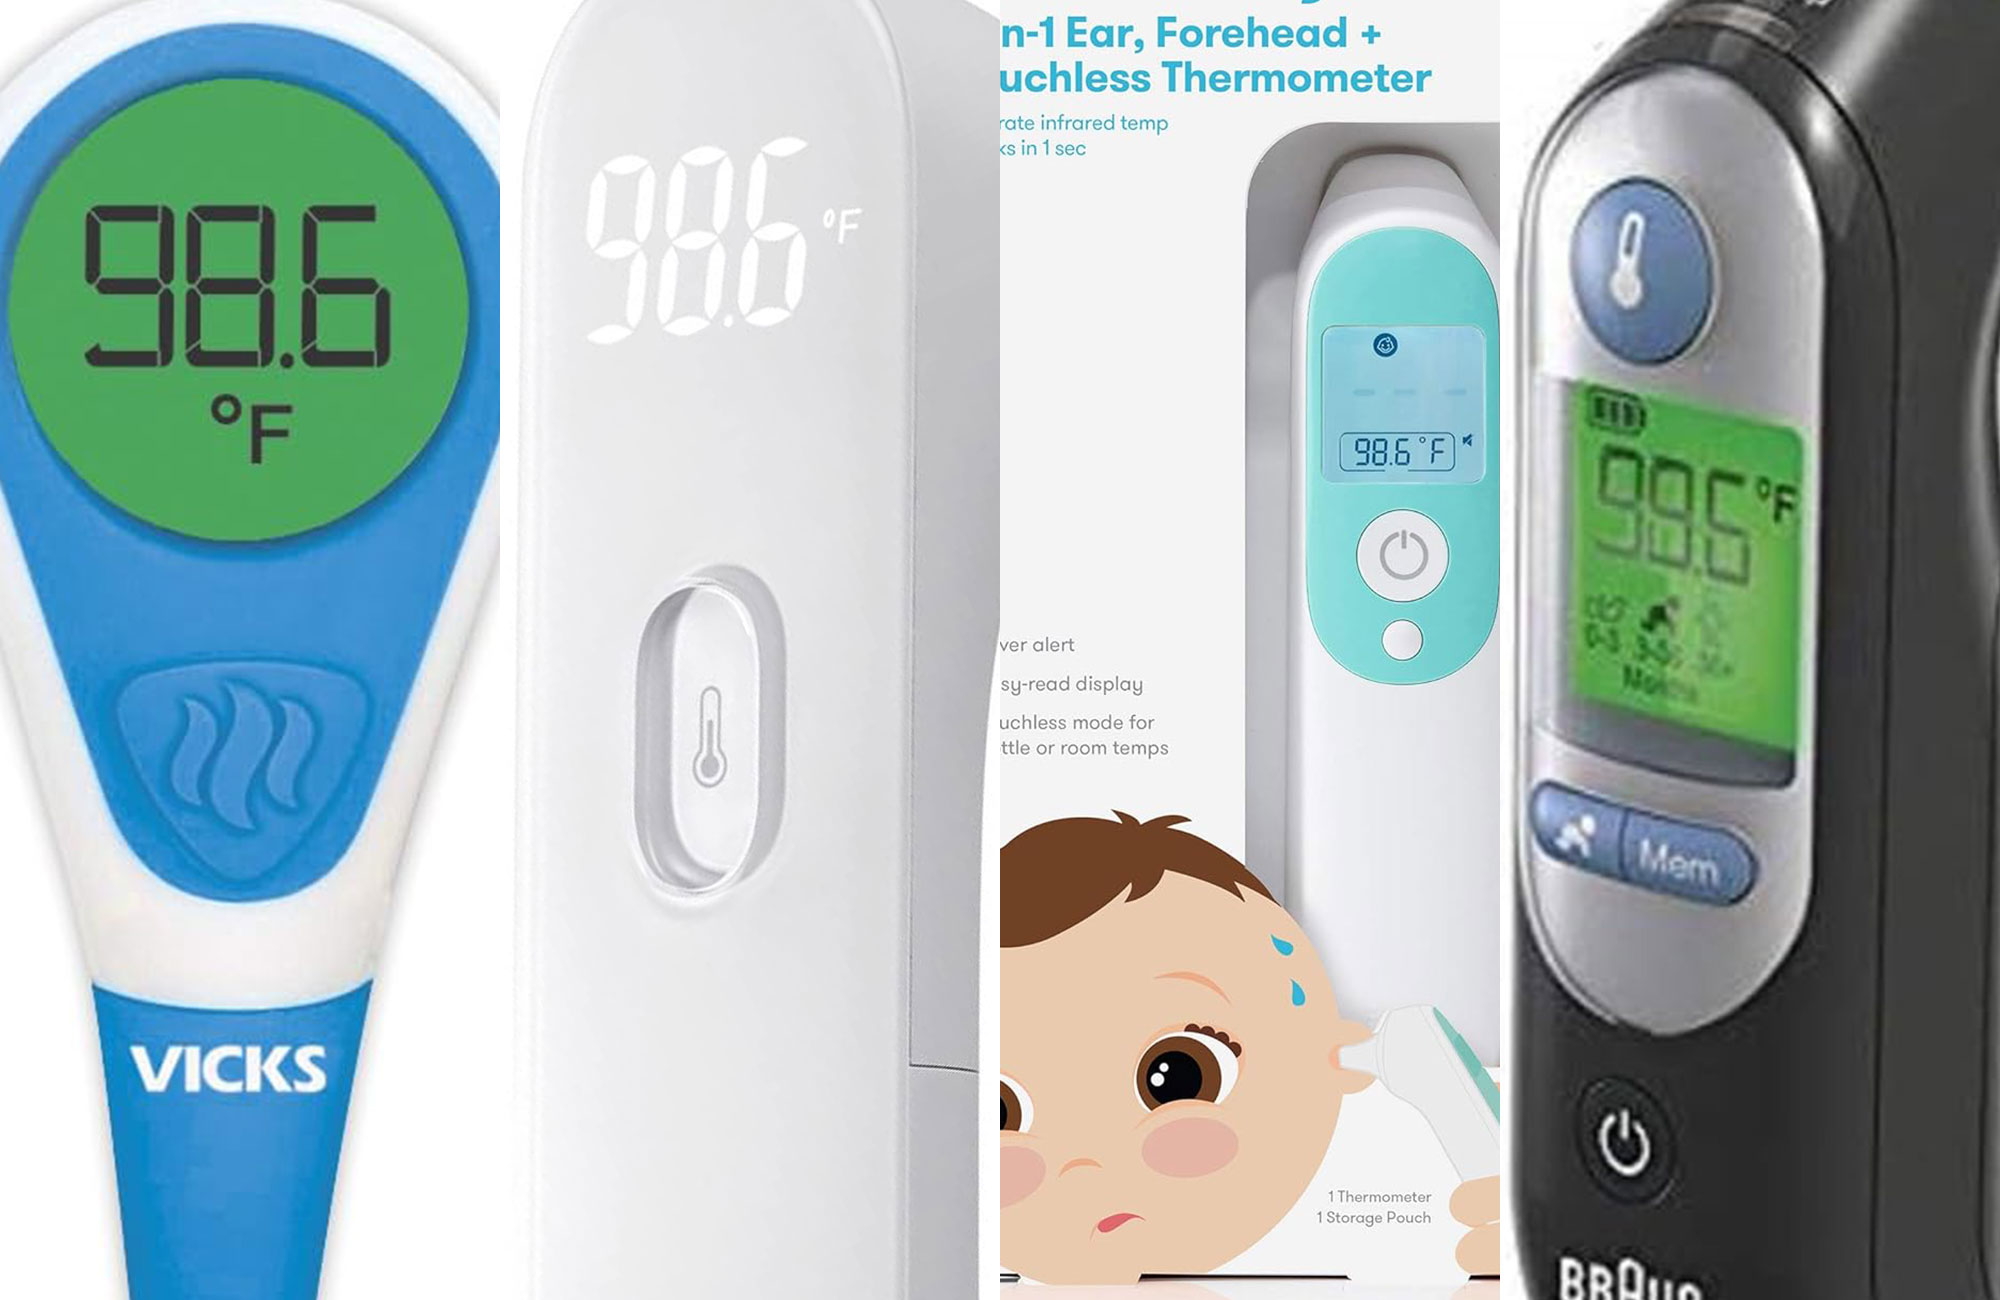 Kinsa QuickCare Smart Thermometer for Fever - Digital Medical Baby